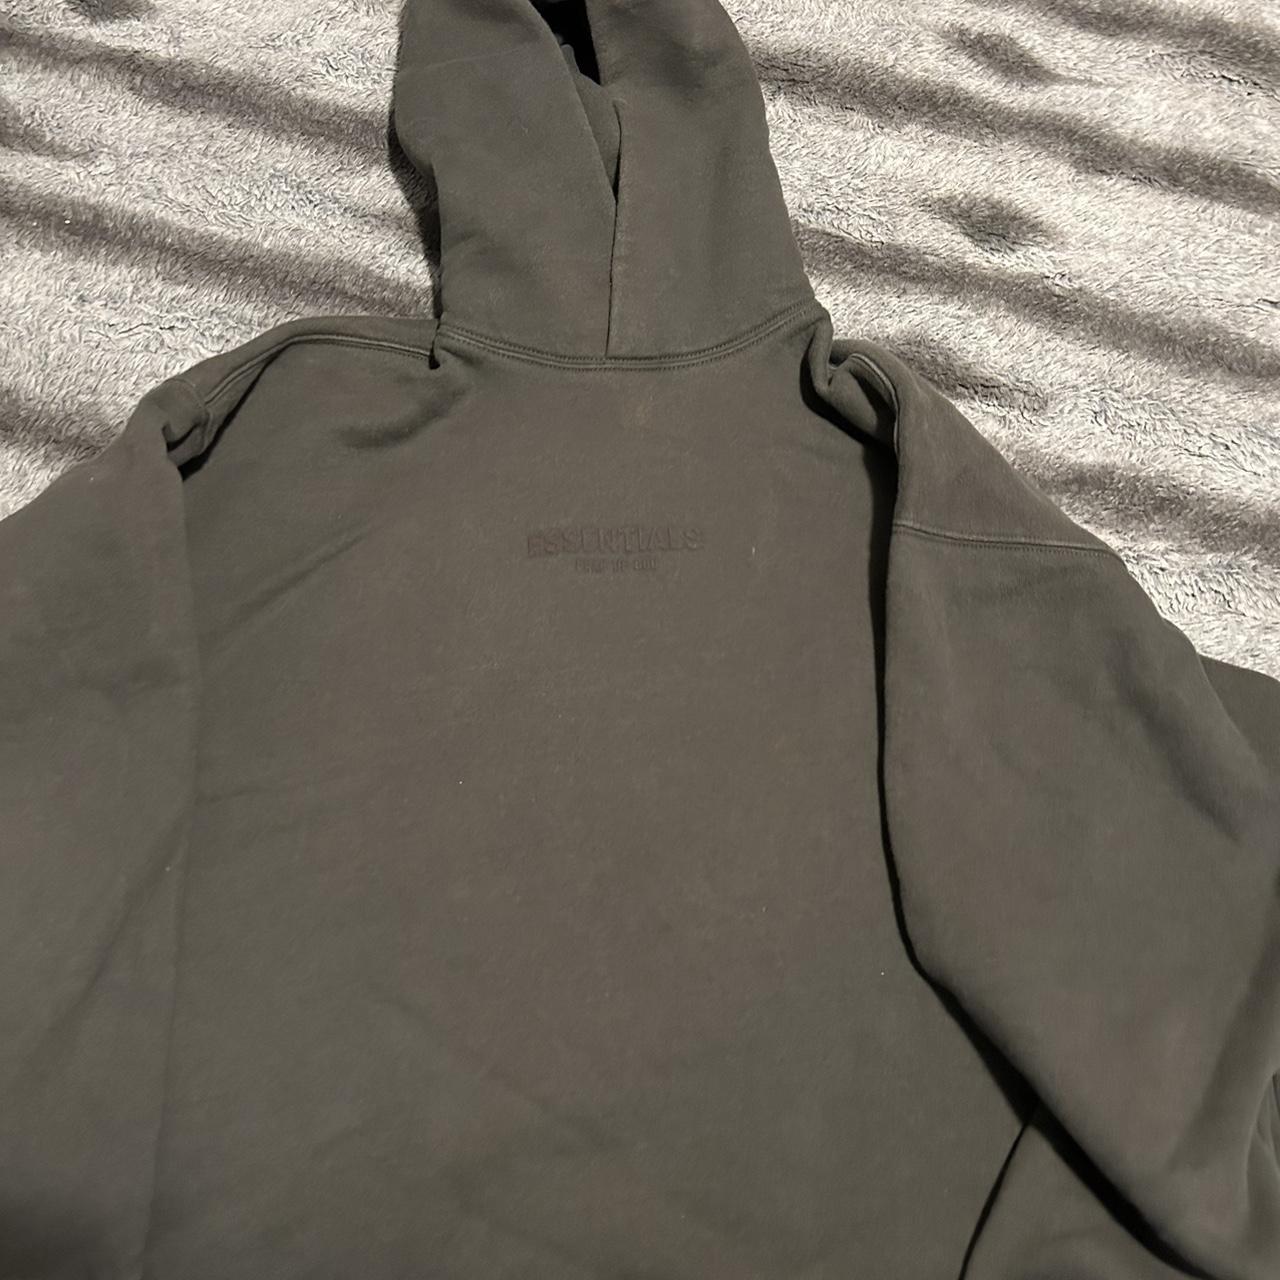 Essentials hoodie is oversized so prolly will fit a L - Depop